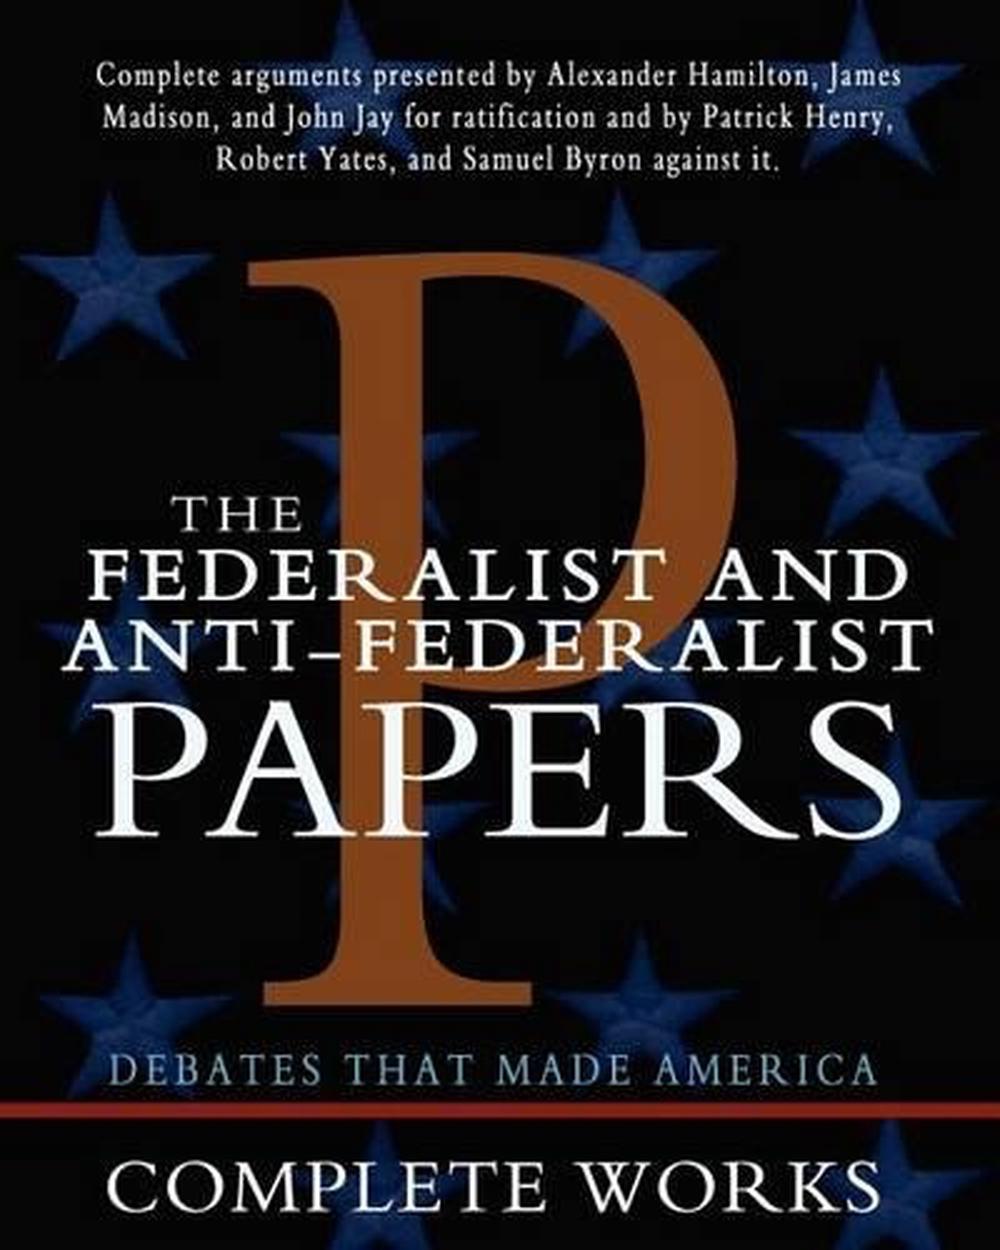 alexander hamilton and the federalist papers